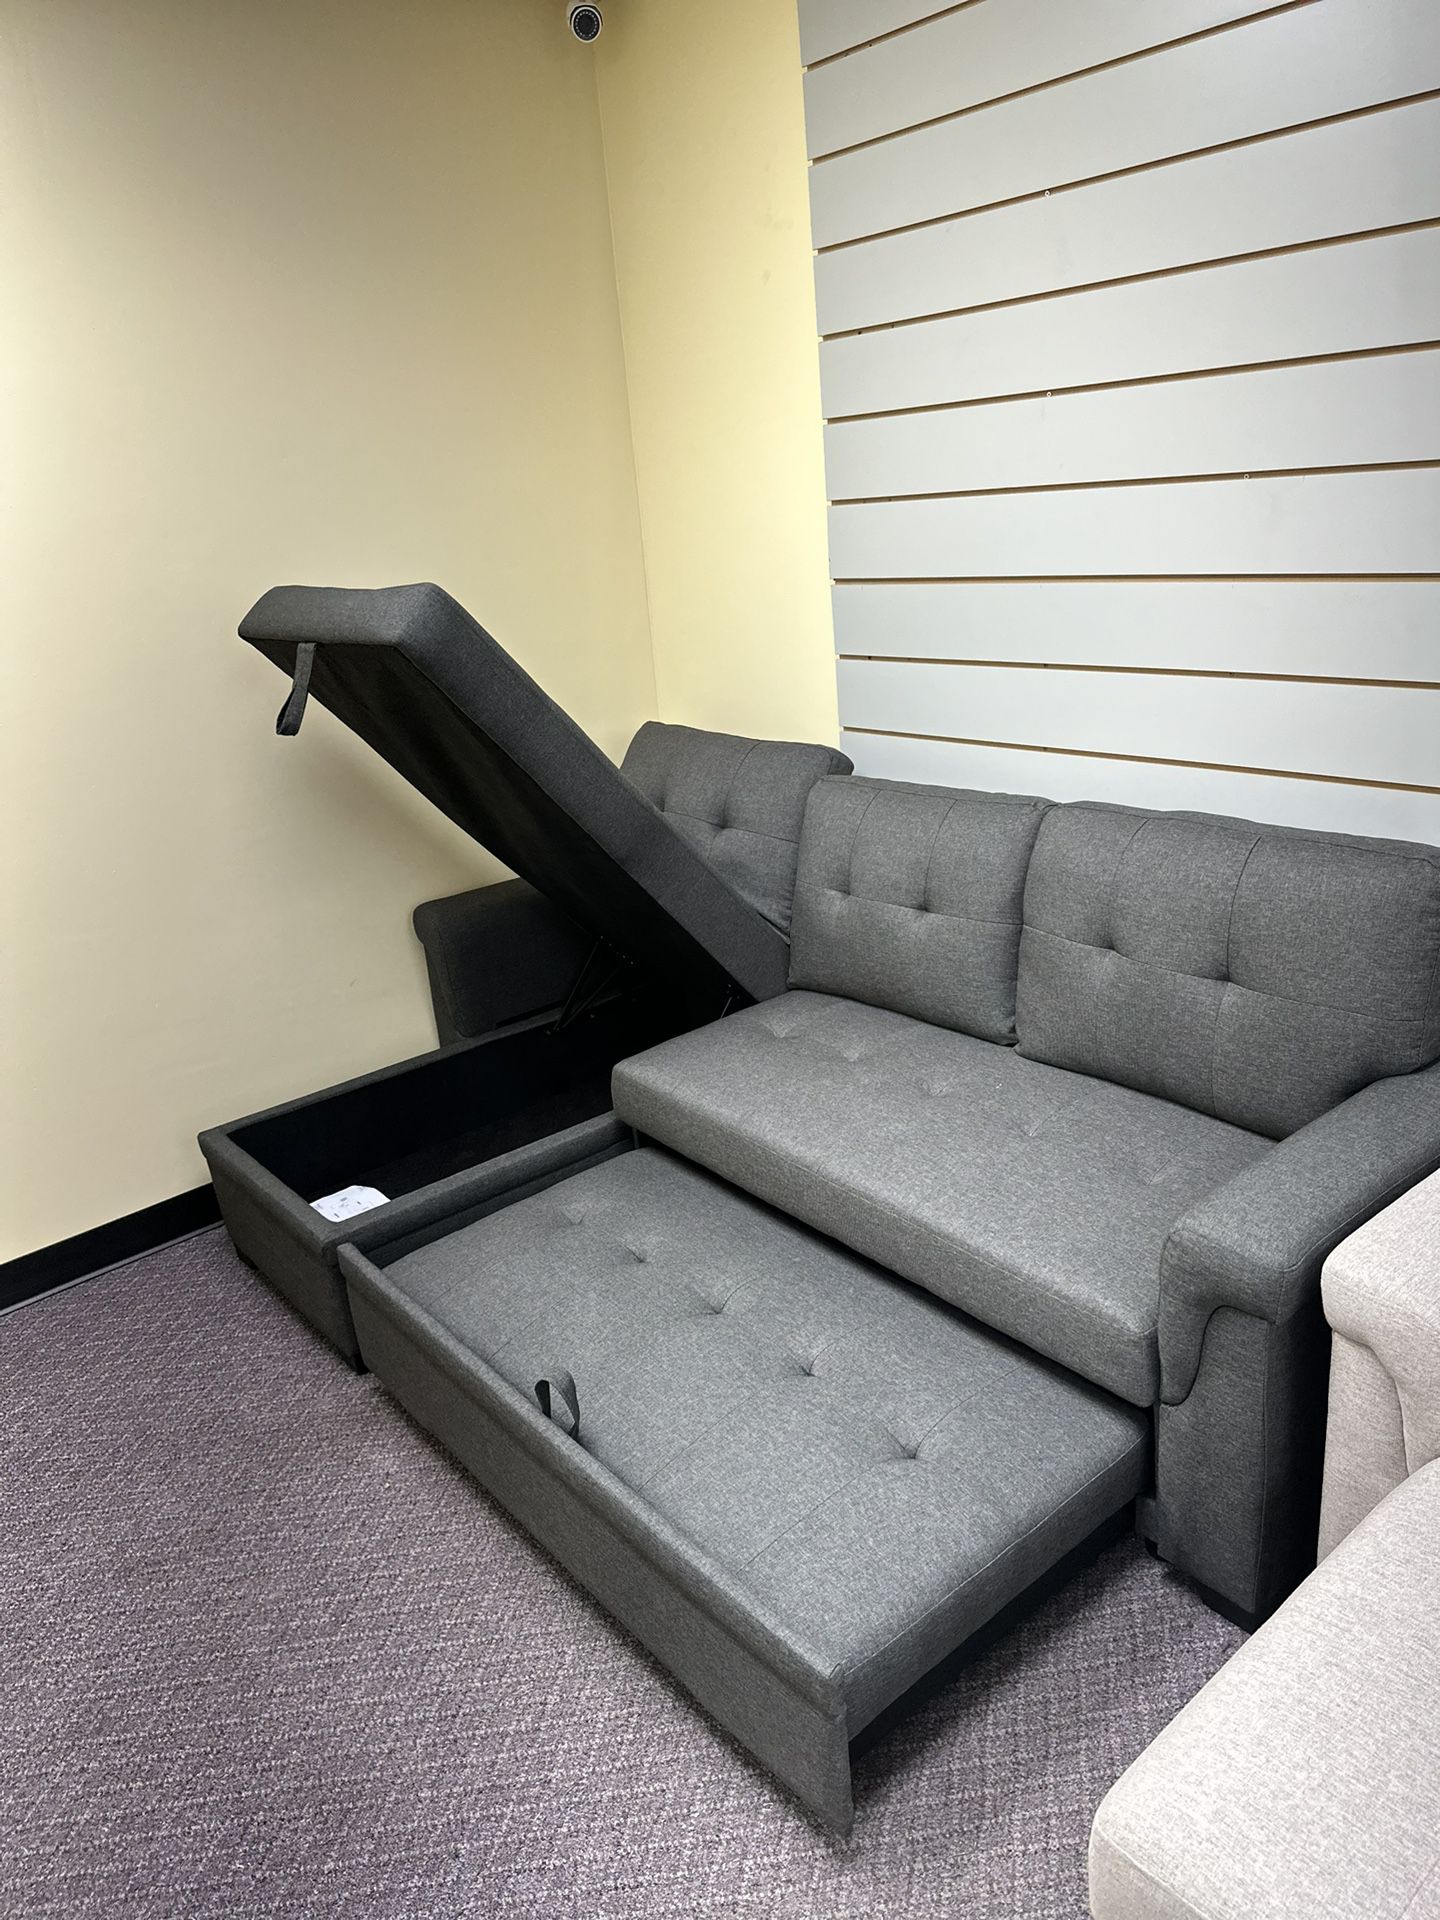 Modern sectional Sleeper sofa sale- limited supply- zero interest Finance available- shop now pay later.  